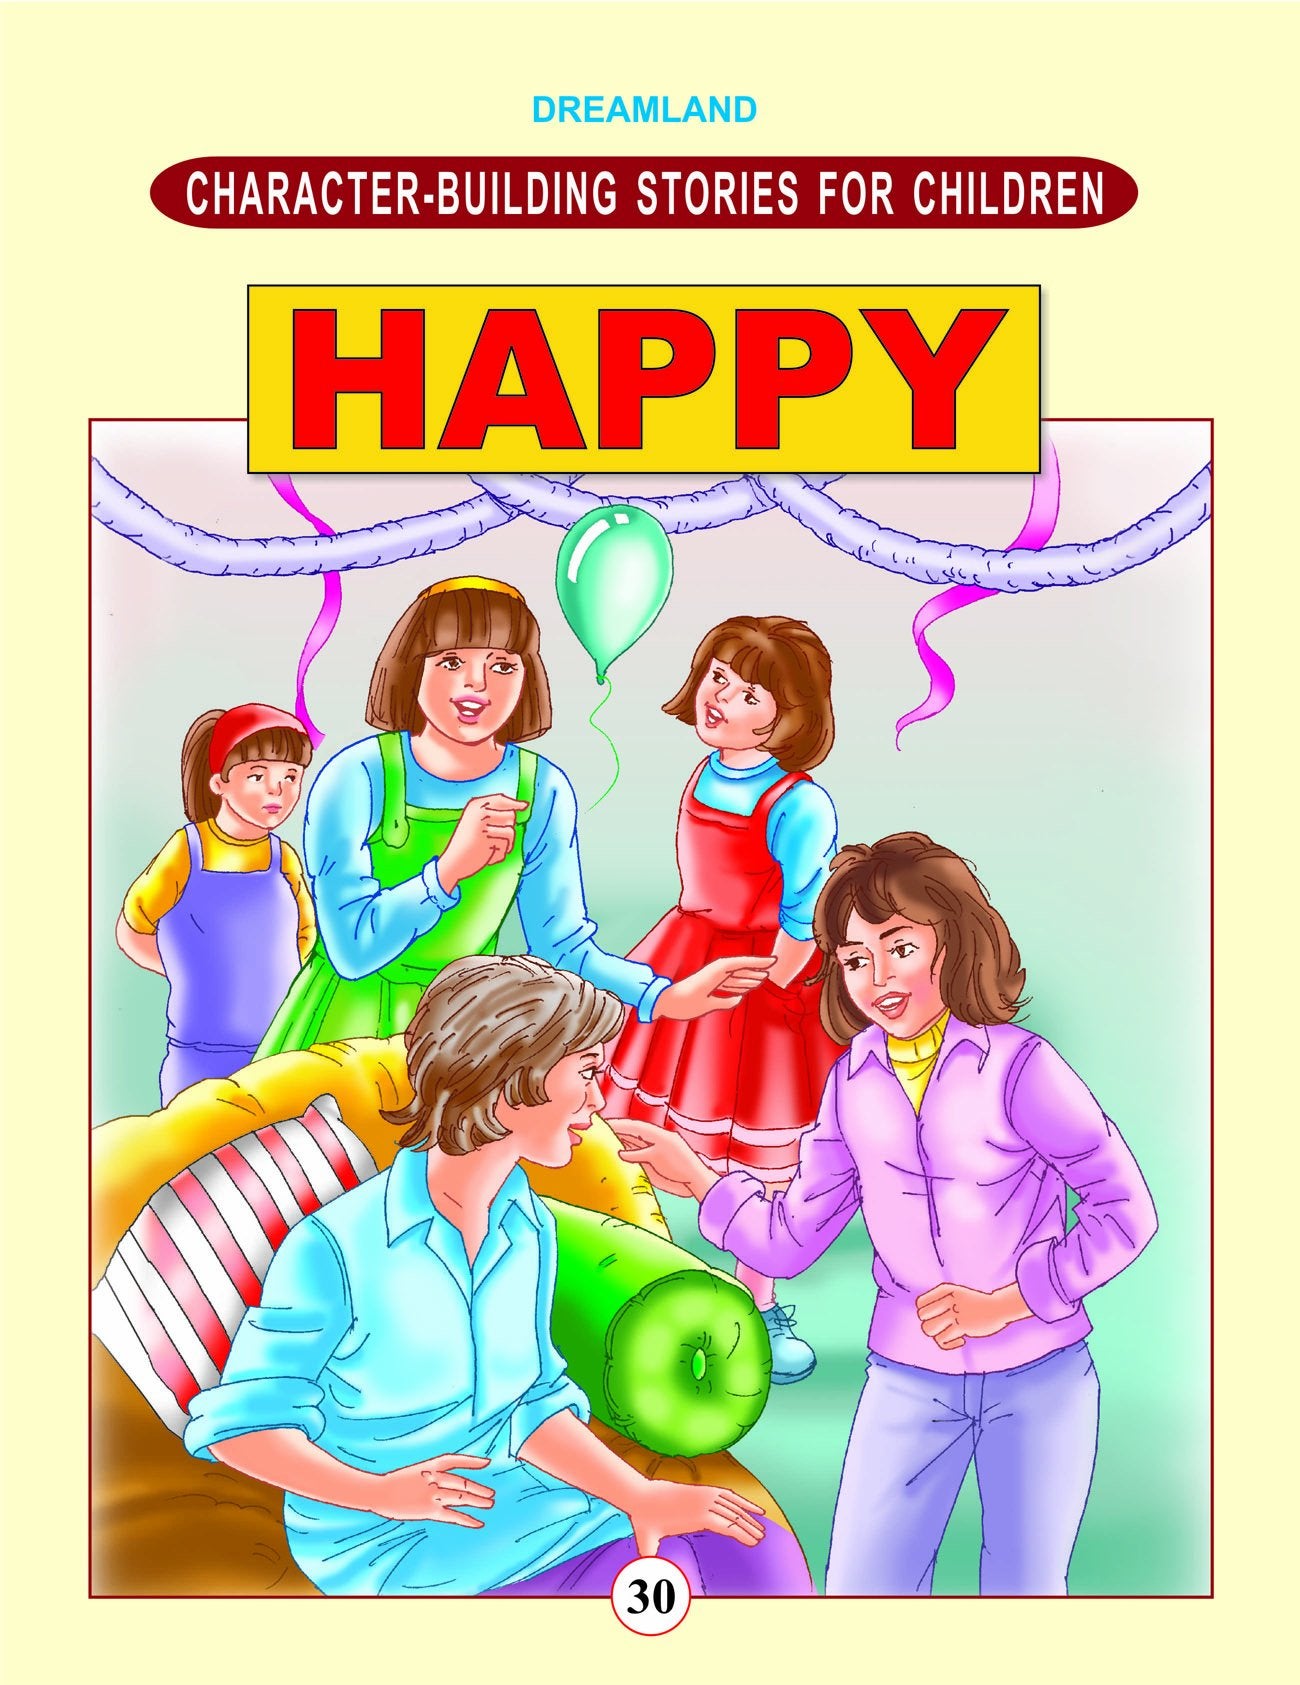 Character-Building - Happy (Character Building Stories for Children)